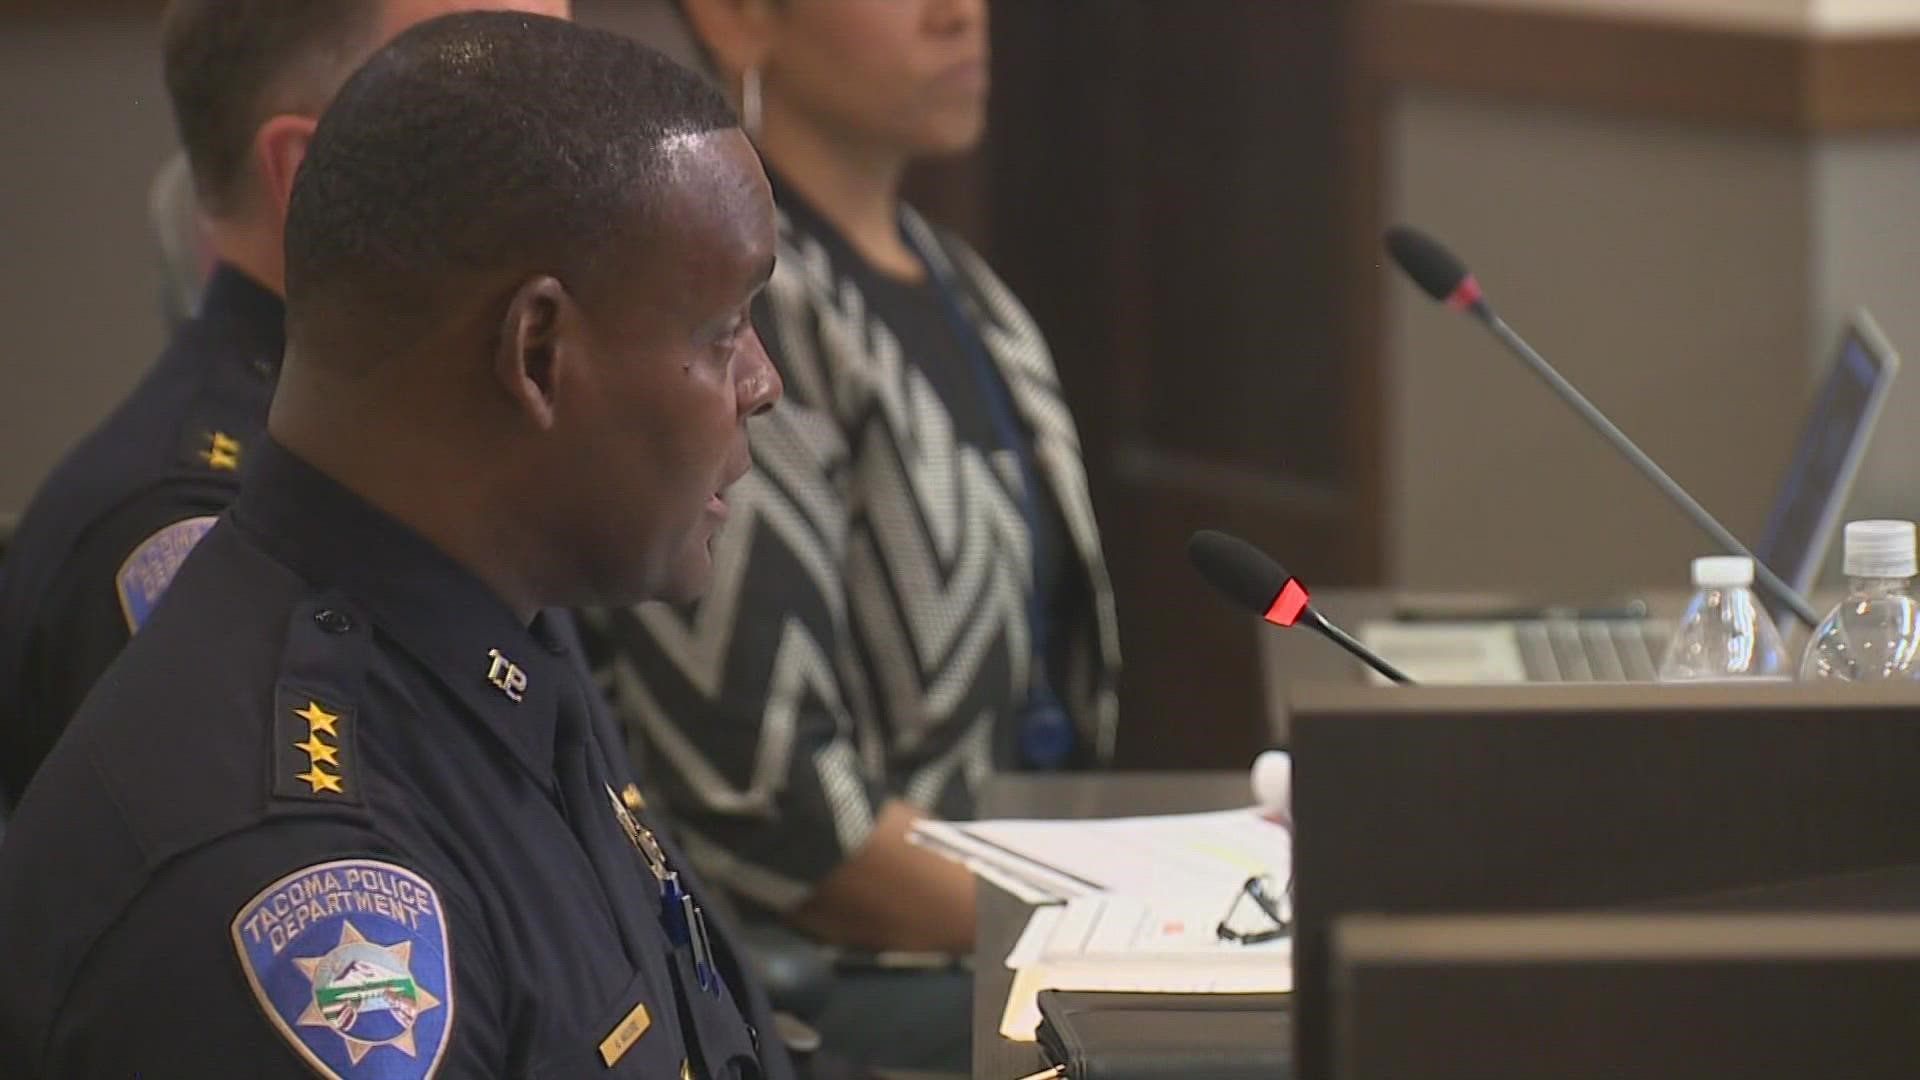 Chief Avery Moore says his plan is tailor made for the city, which includes its current level of resources and officers